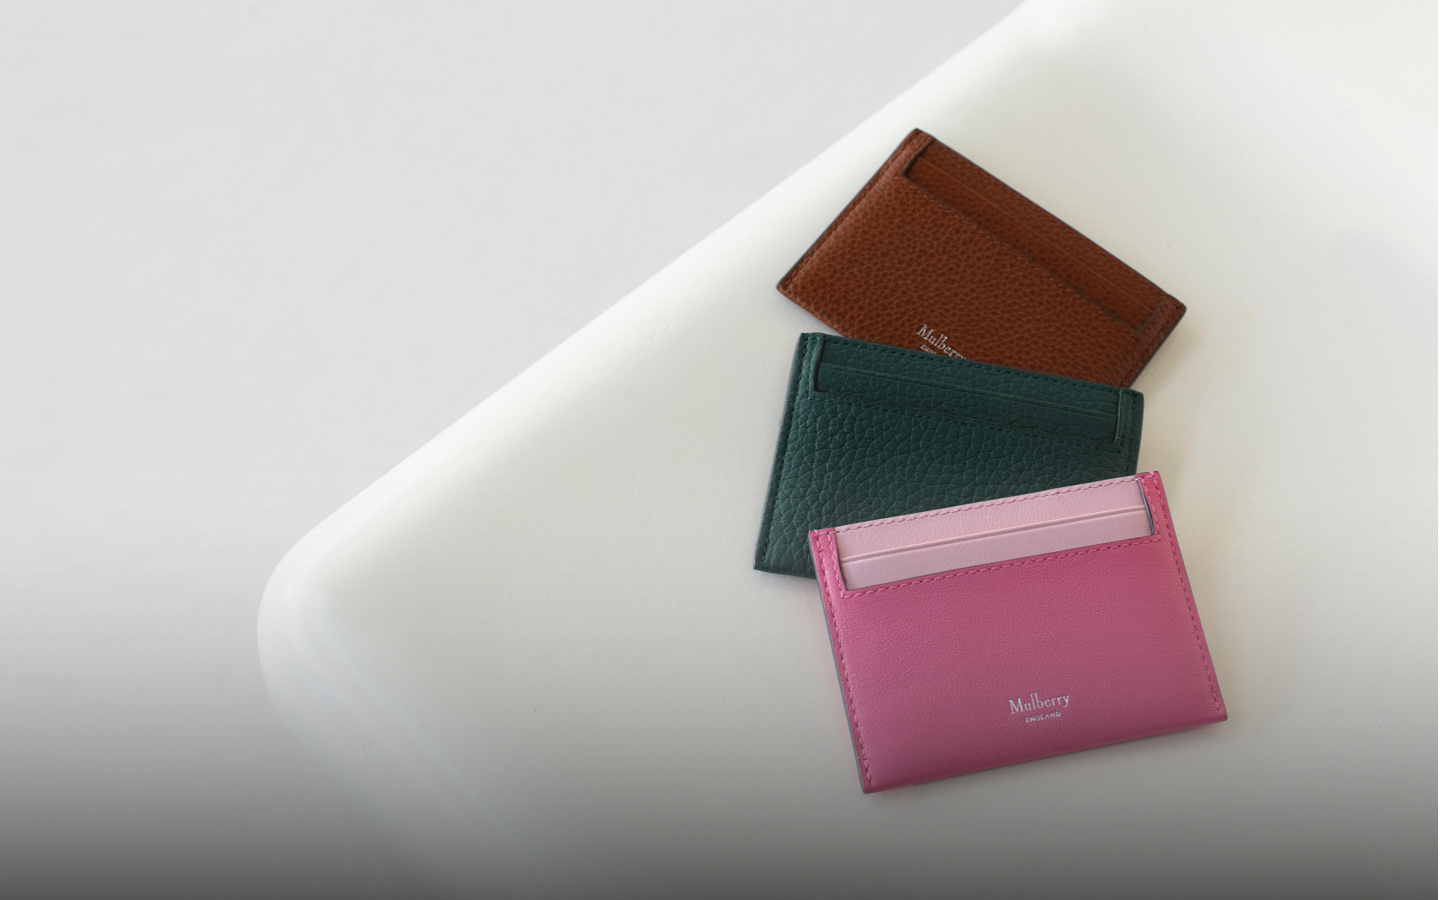 mulberry credit card slips in pink, green and oak